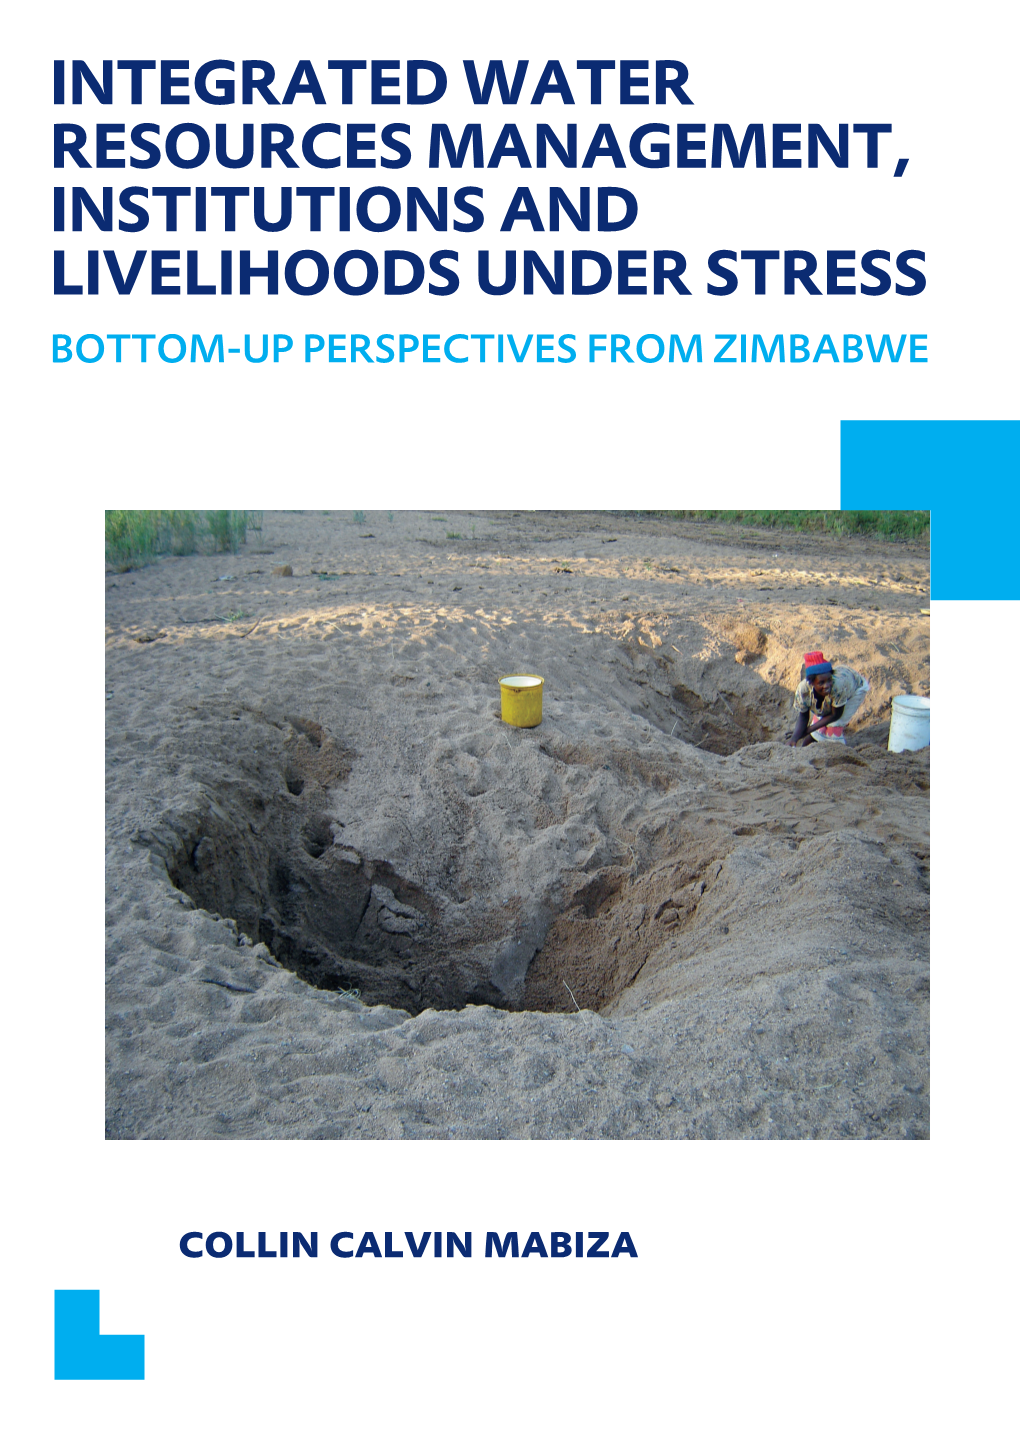 Integrated Water Resources Management, Institutions and Livelihoods Under Stress Bottom-Up Perspectives from Zimbabwe